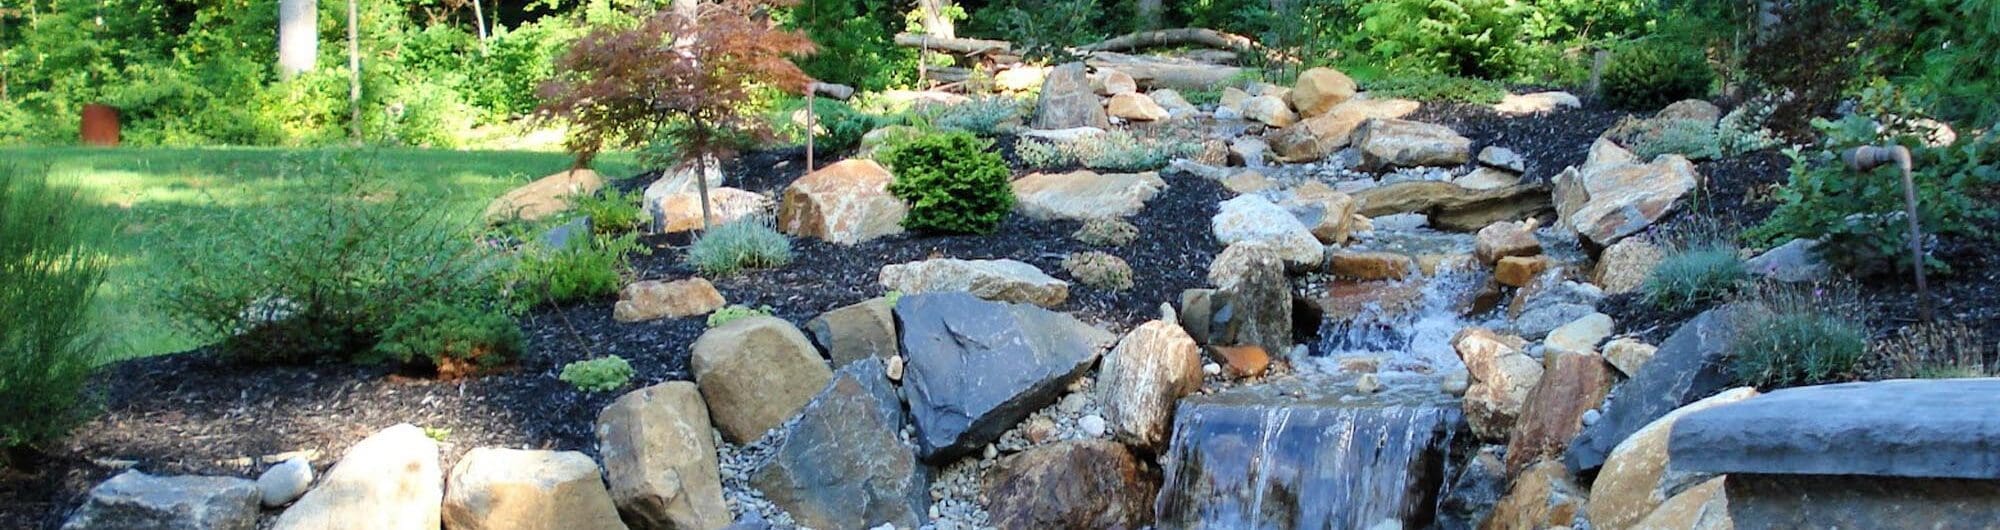 West Chester, PA Landscaping Services Company